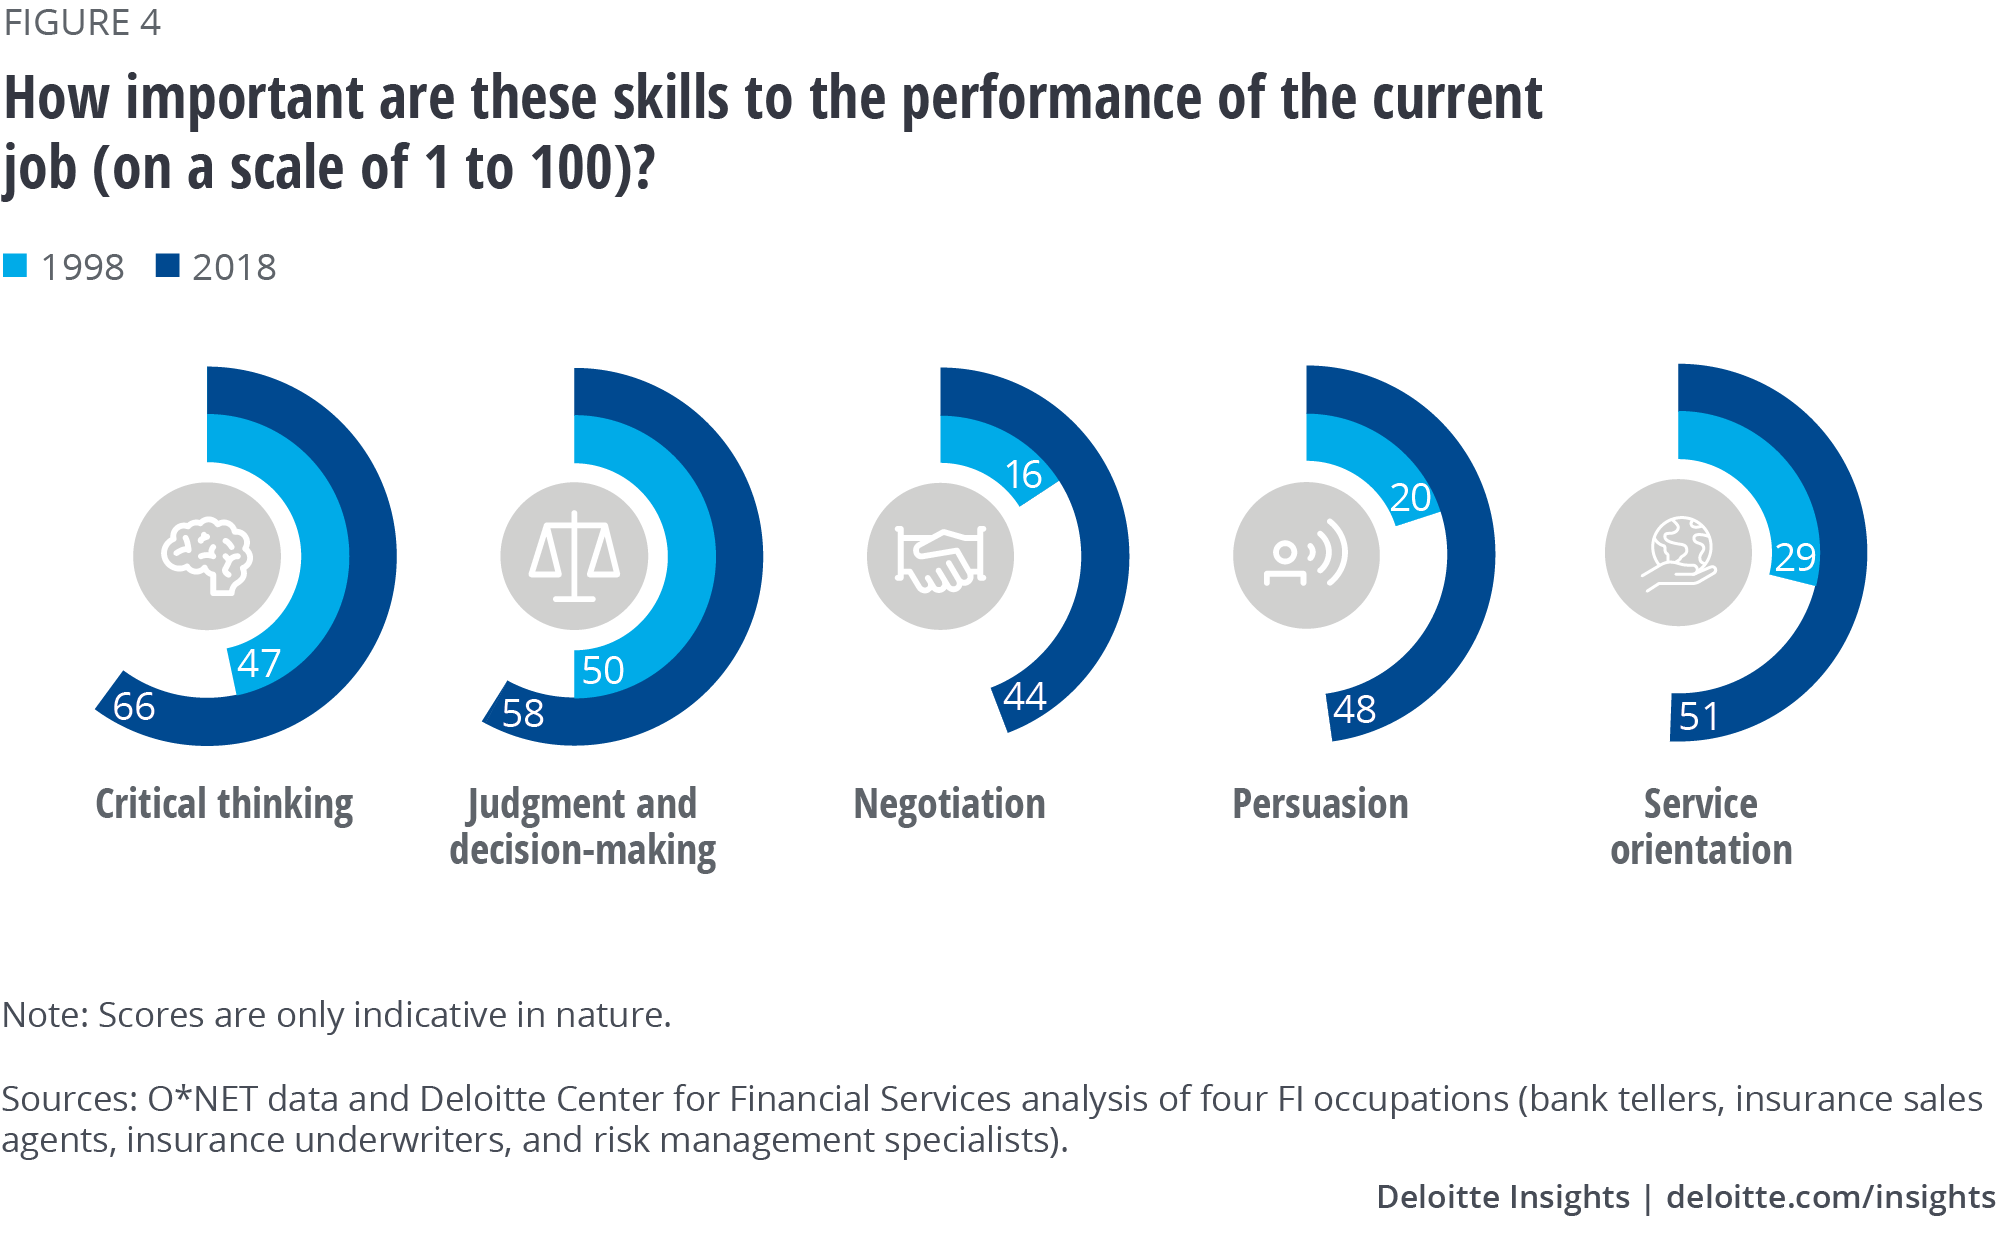 How important are these skills to the performance of the current job (on a scale of 1 to 100)?